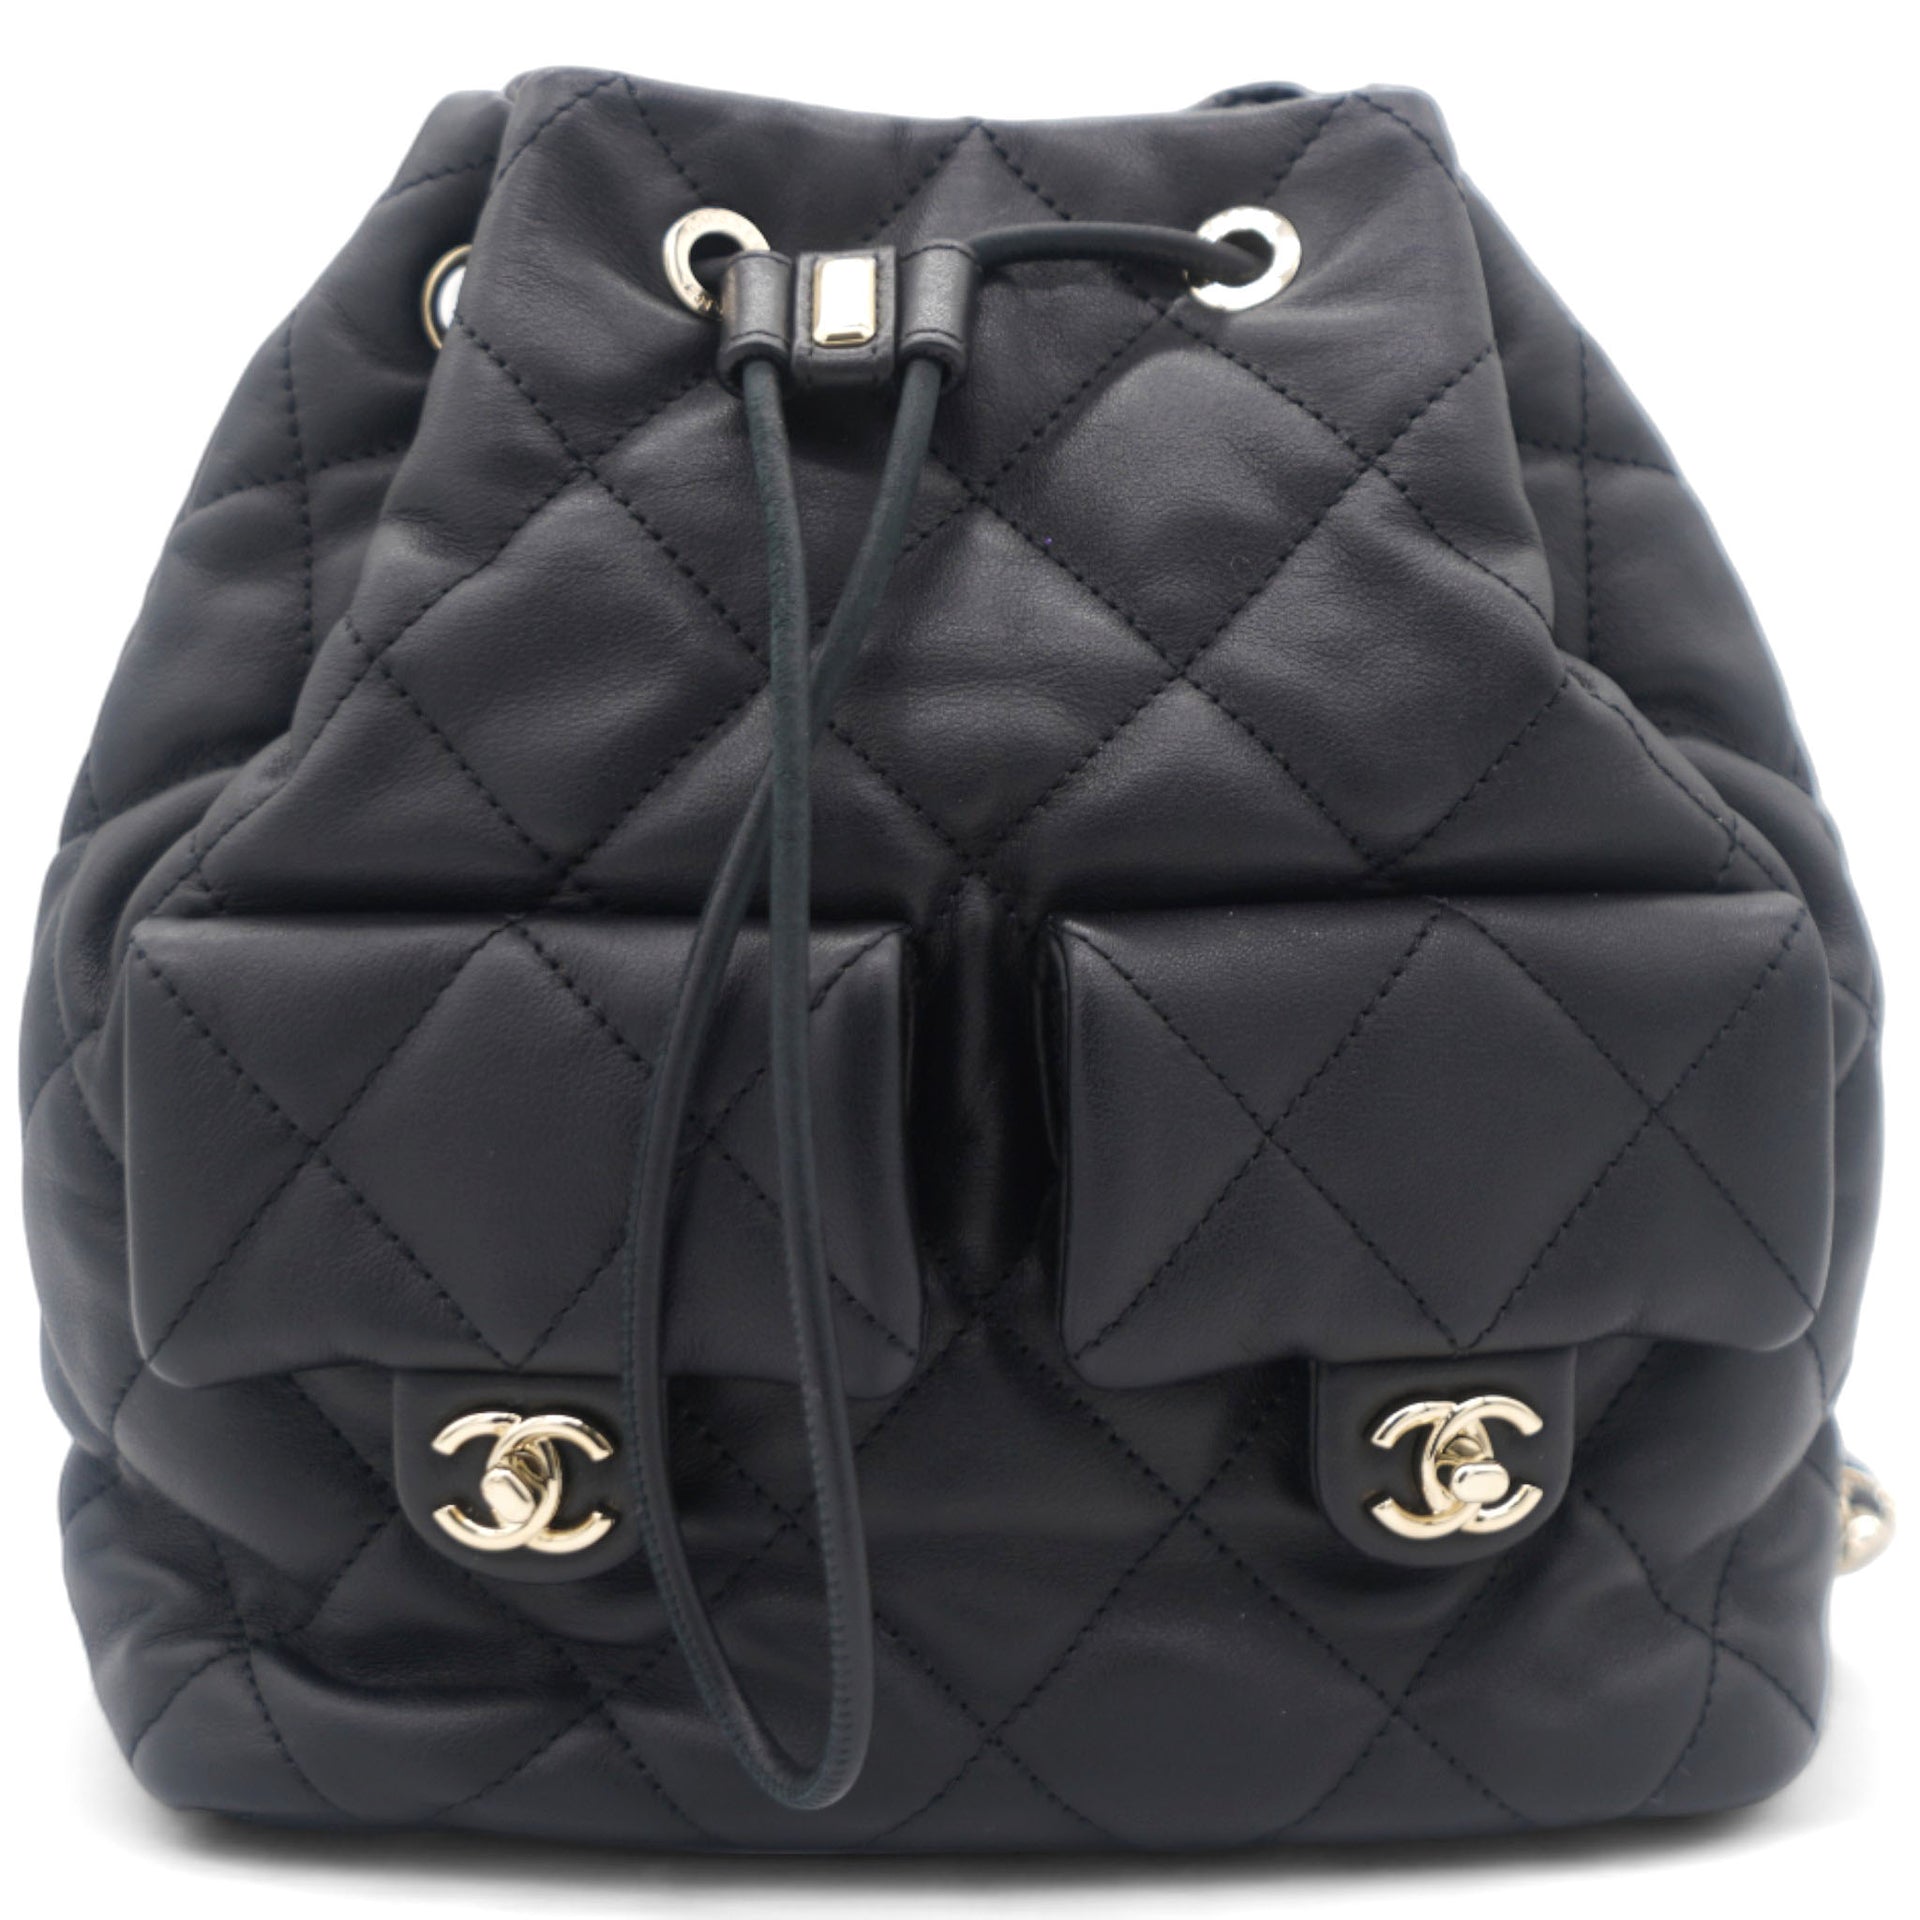 Lambskin Quilted Drawstring Backpack Black